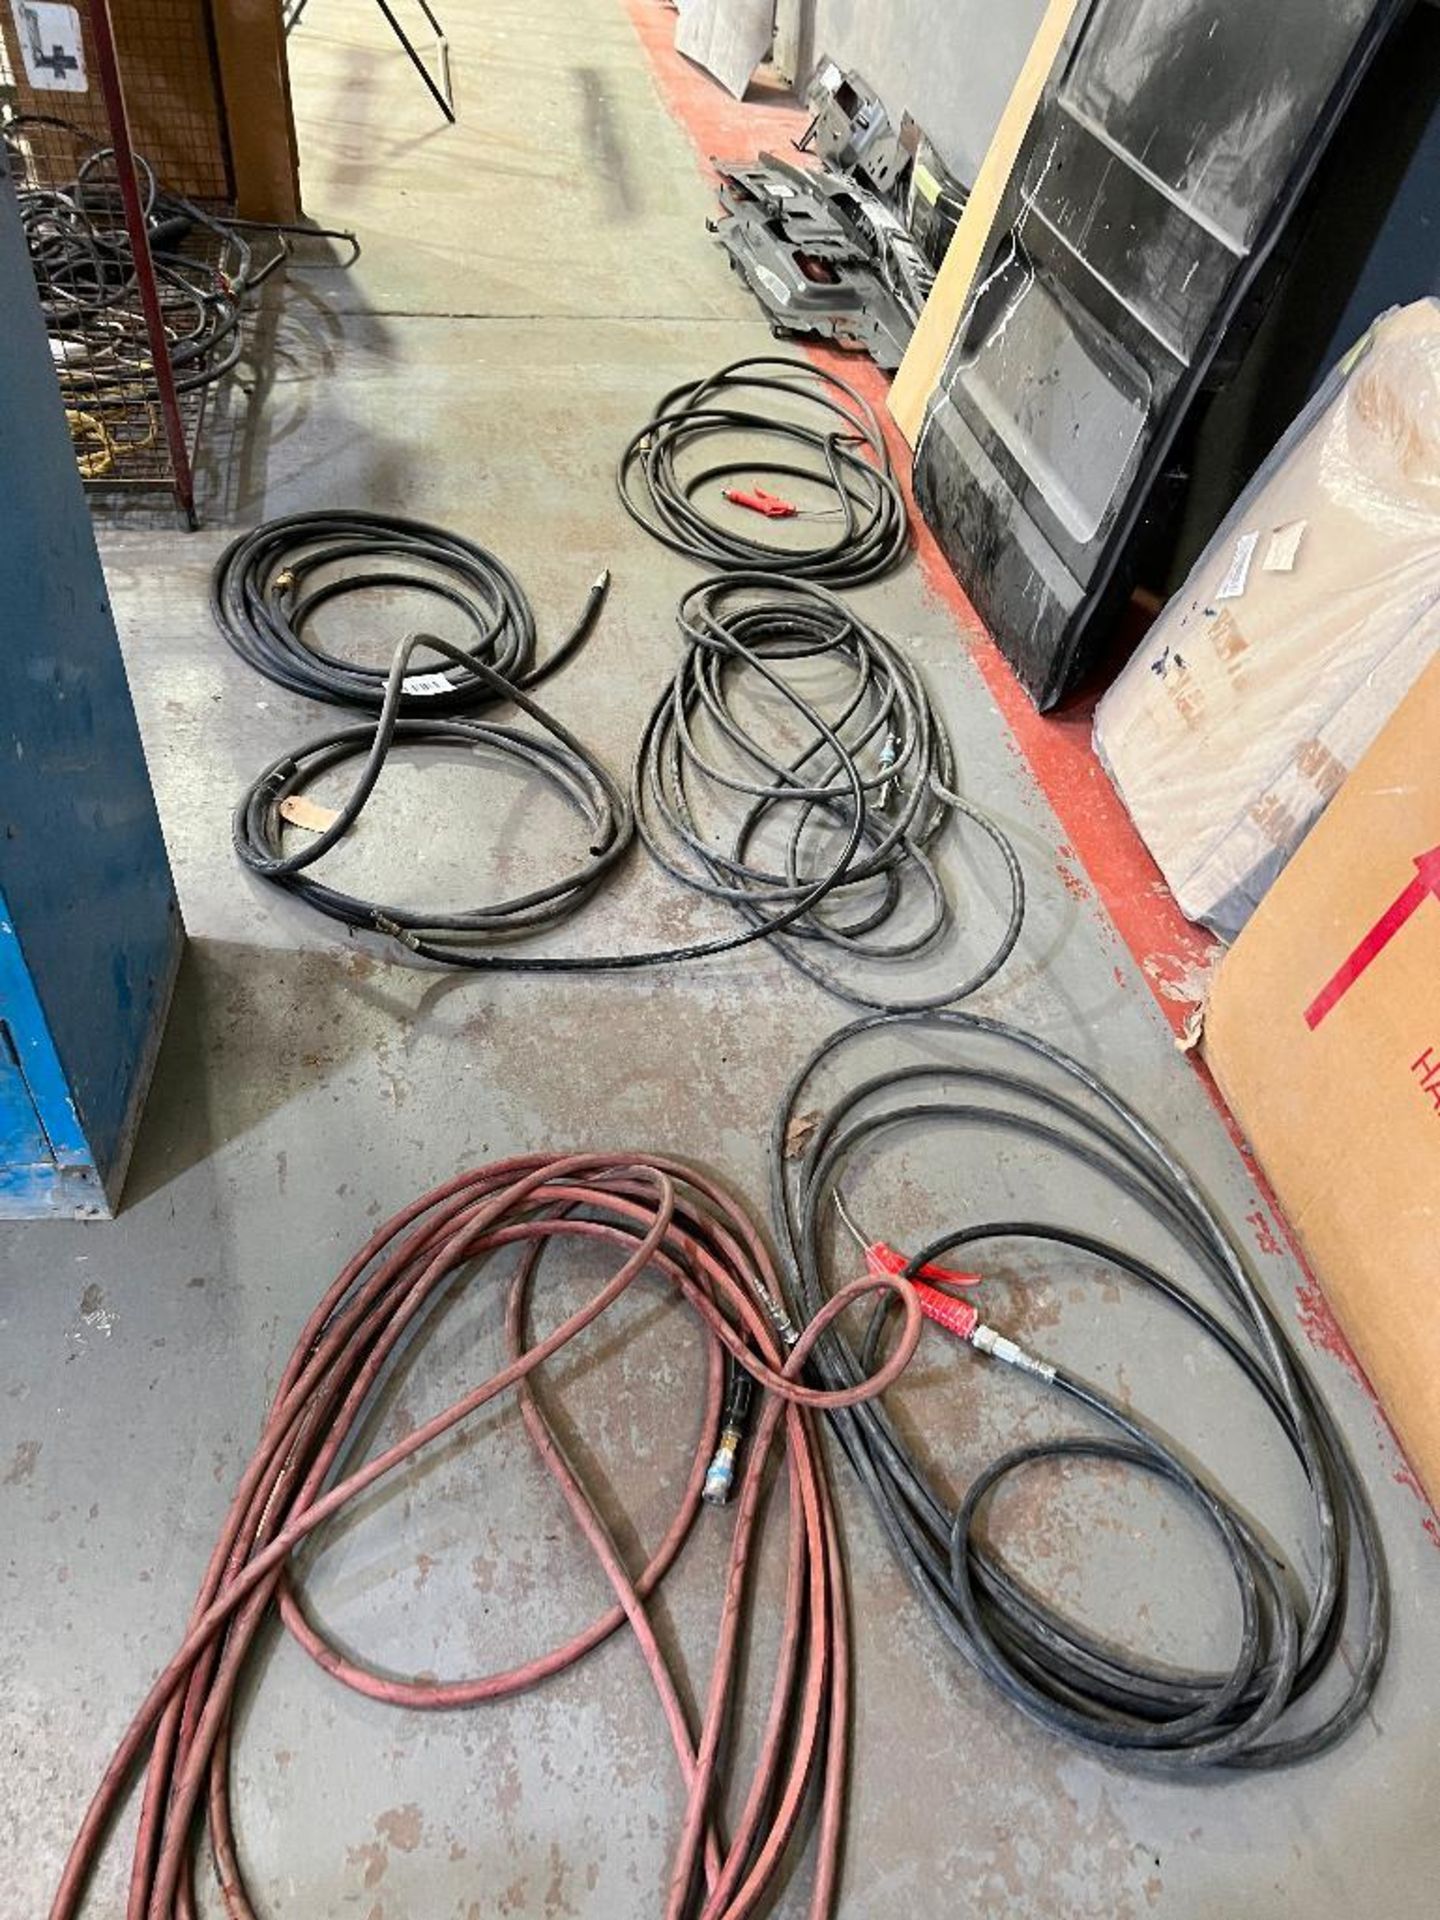 6: Compressed air hoses with various attachments as shown in images